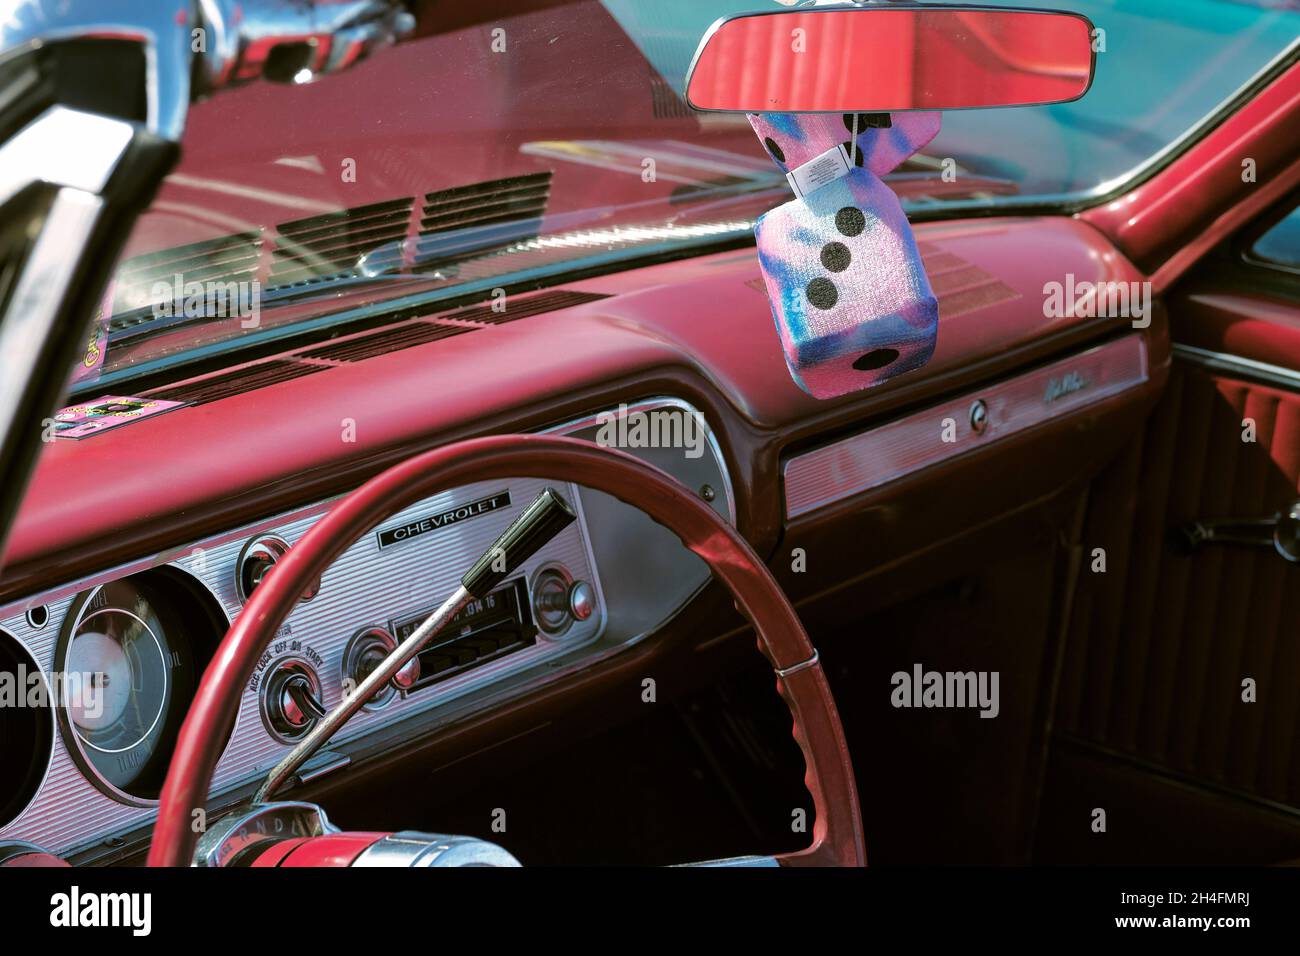 Red and chrome custom car interior on display at the 2021 Endless Summer Cruisin in Ocean City Maryland. Stock Photo